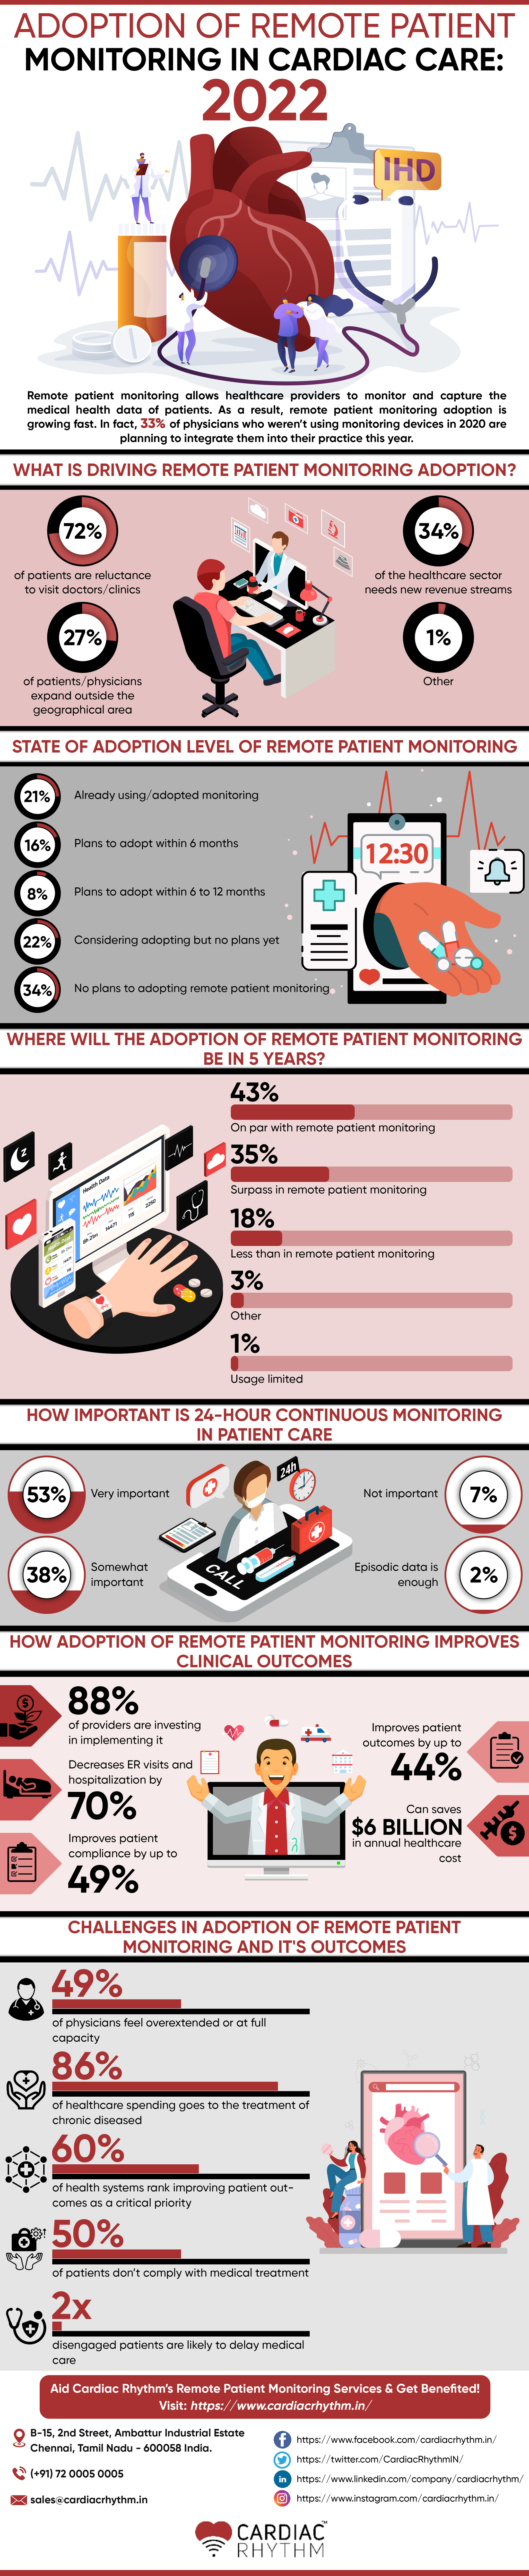 Adoption of Remote Patient Monitoring in Cardiac Care: 2022